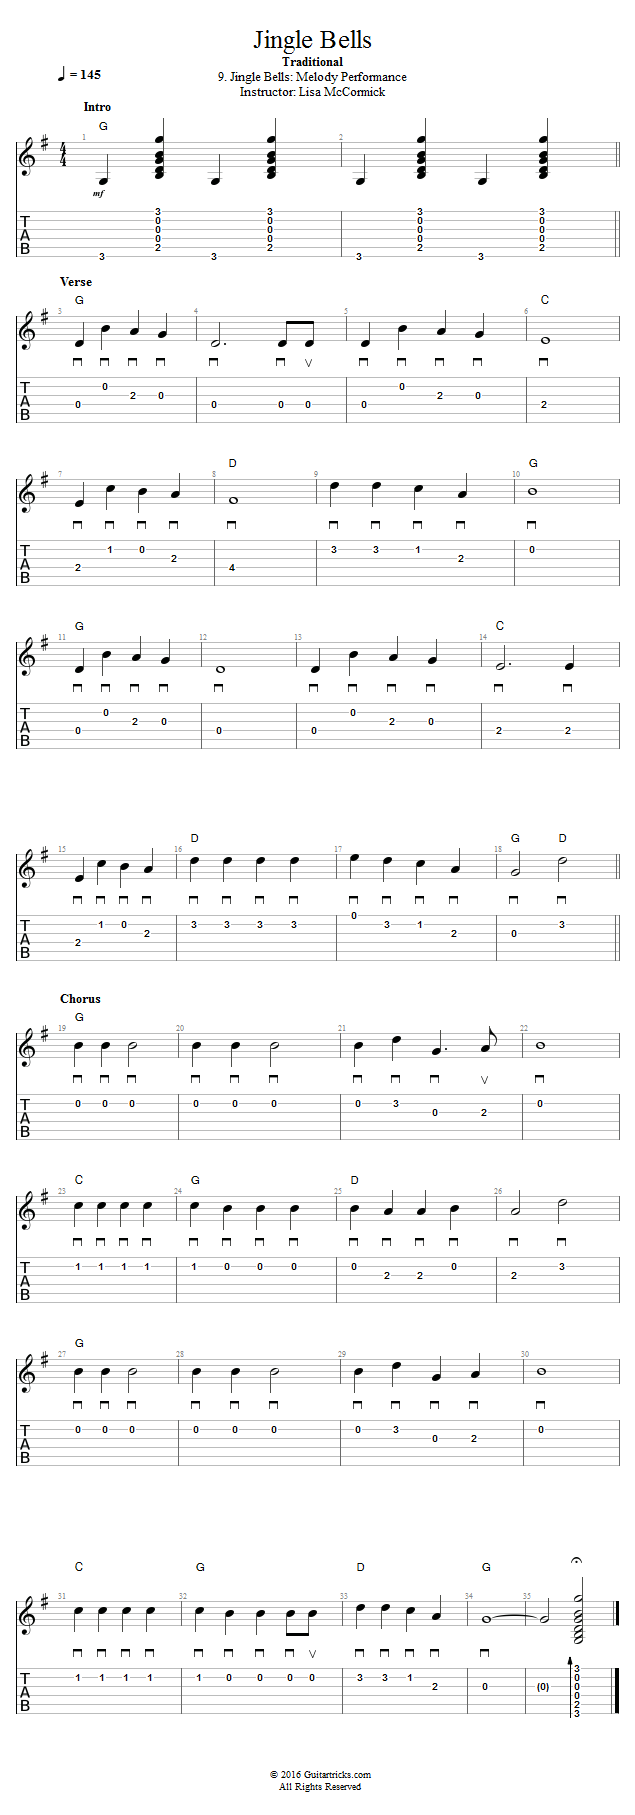 Jingle Bells: Melody Performance song notation